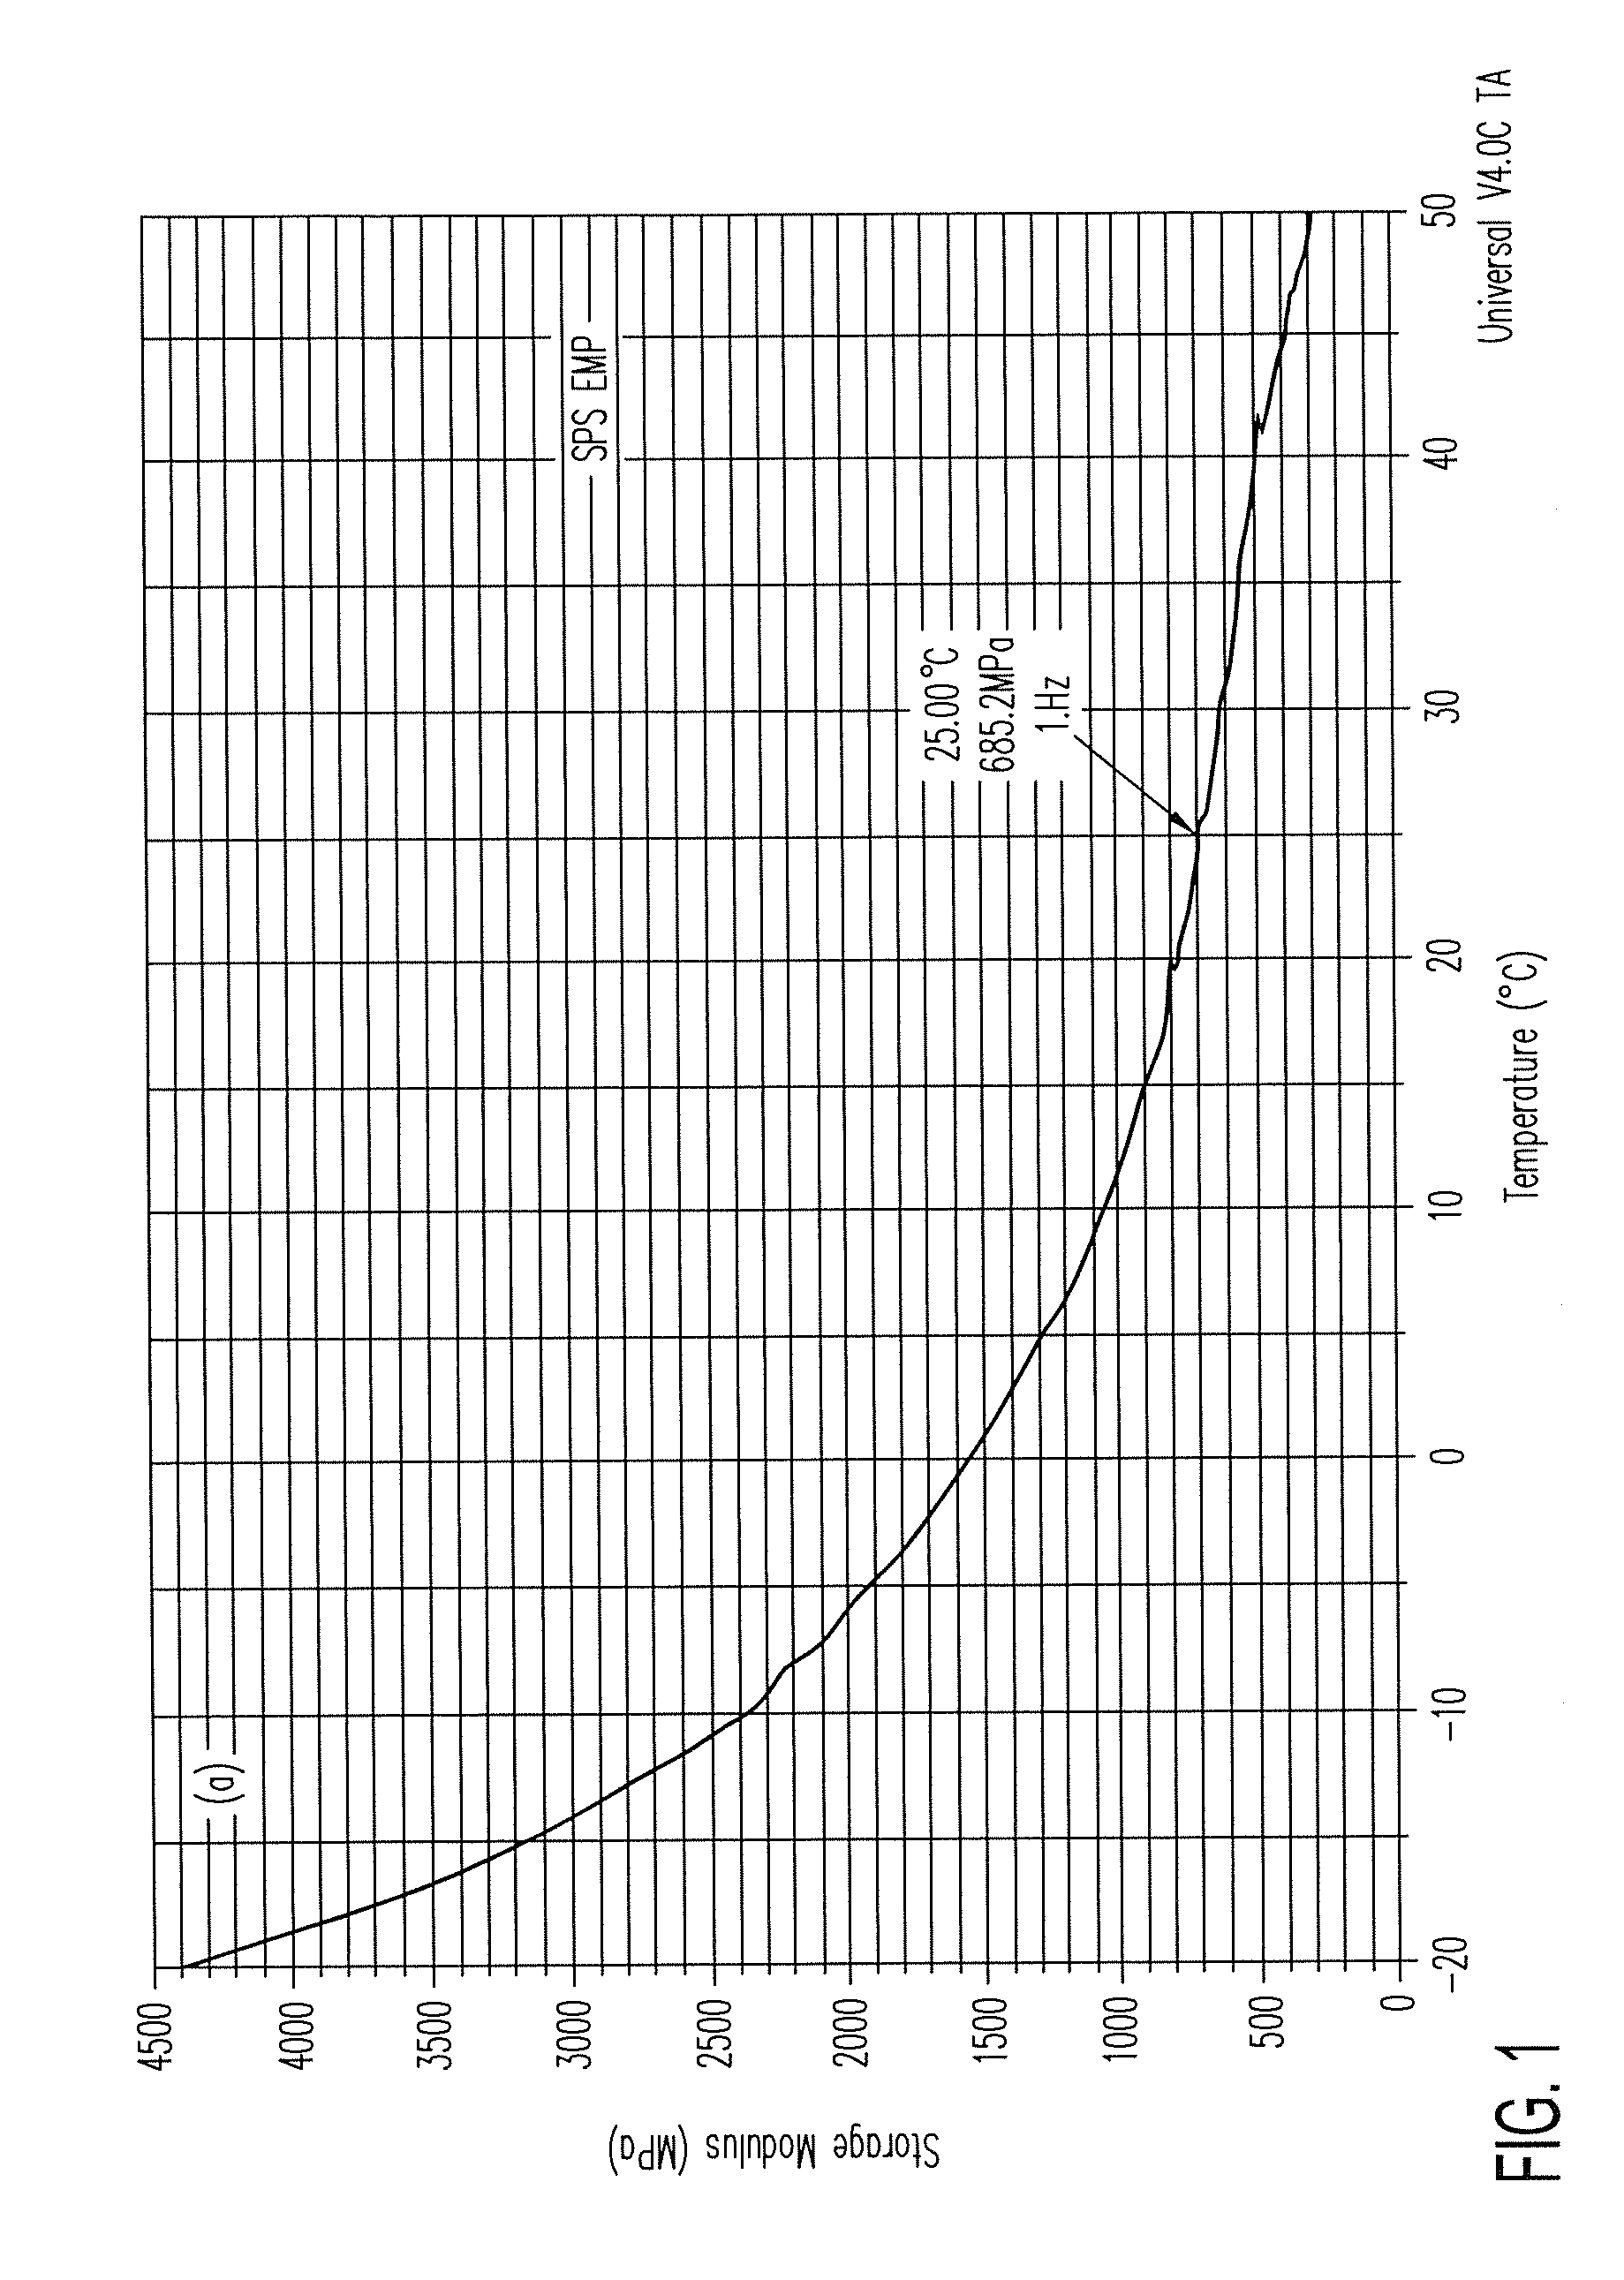 EMP actuators for deformable surface and keyboard application